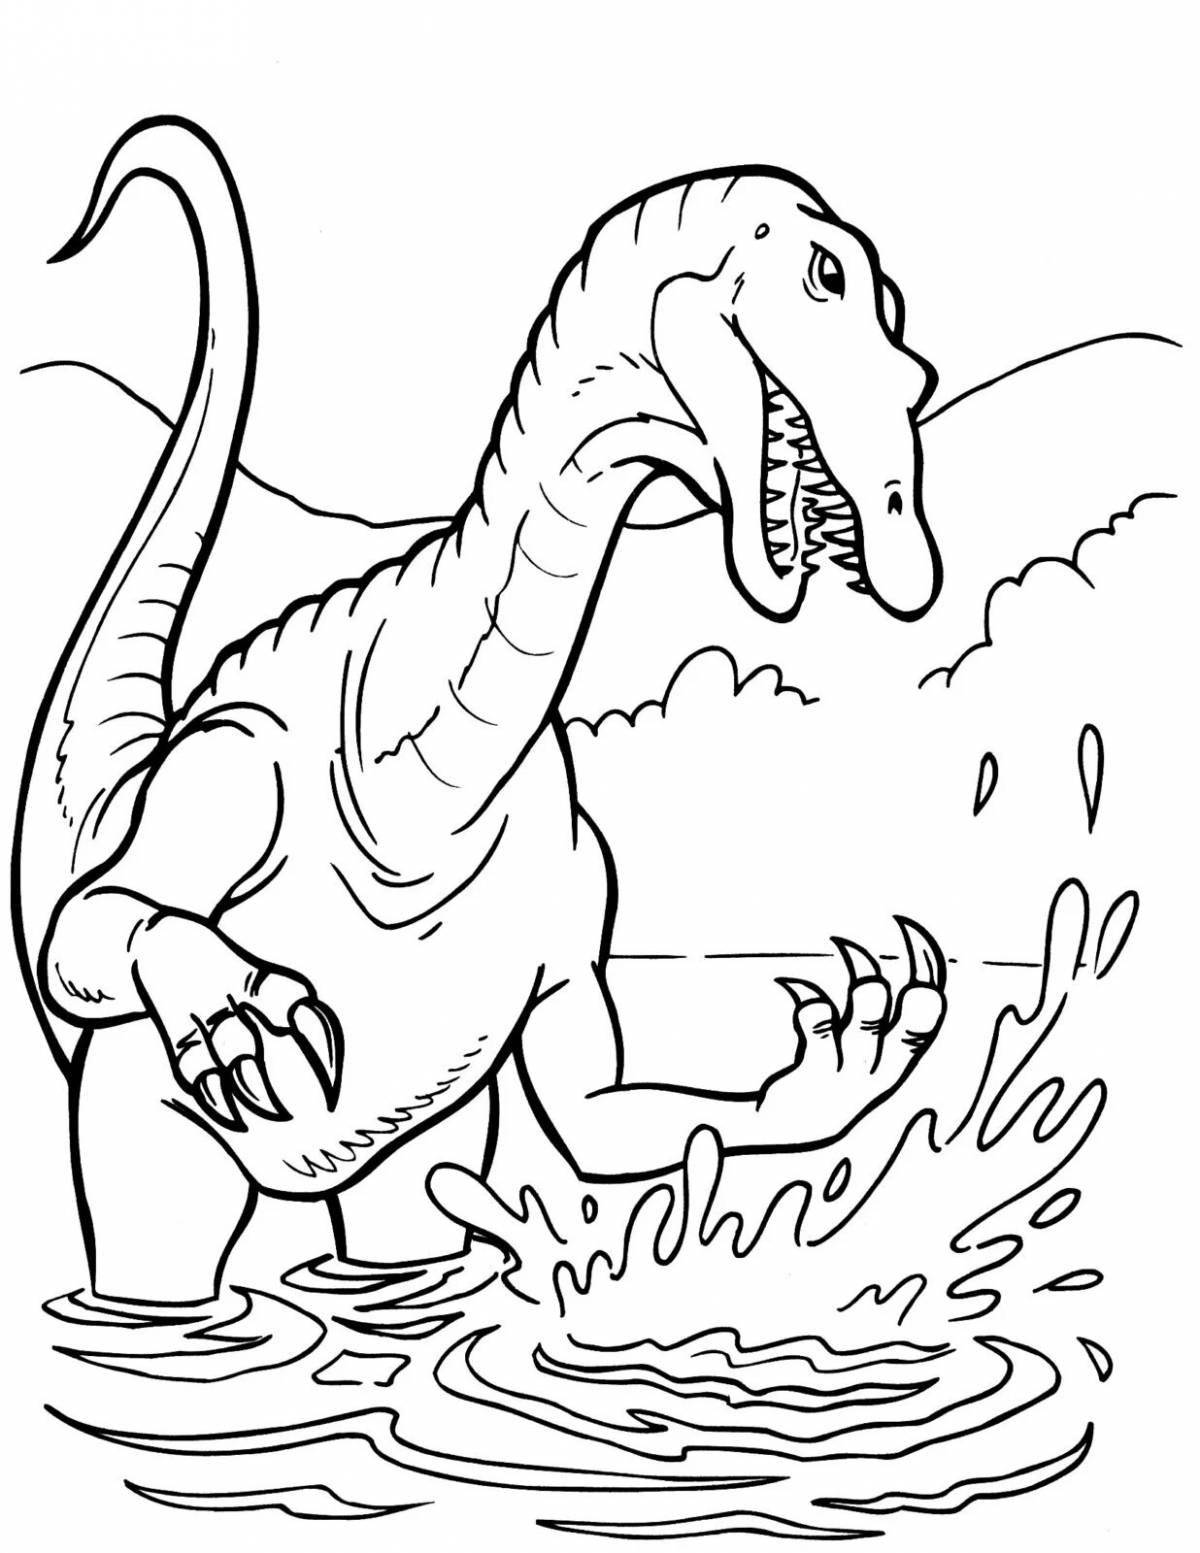 Funny dinosaur coloring pages for boys 7 years old